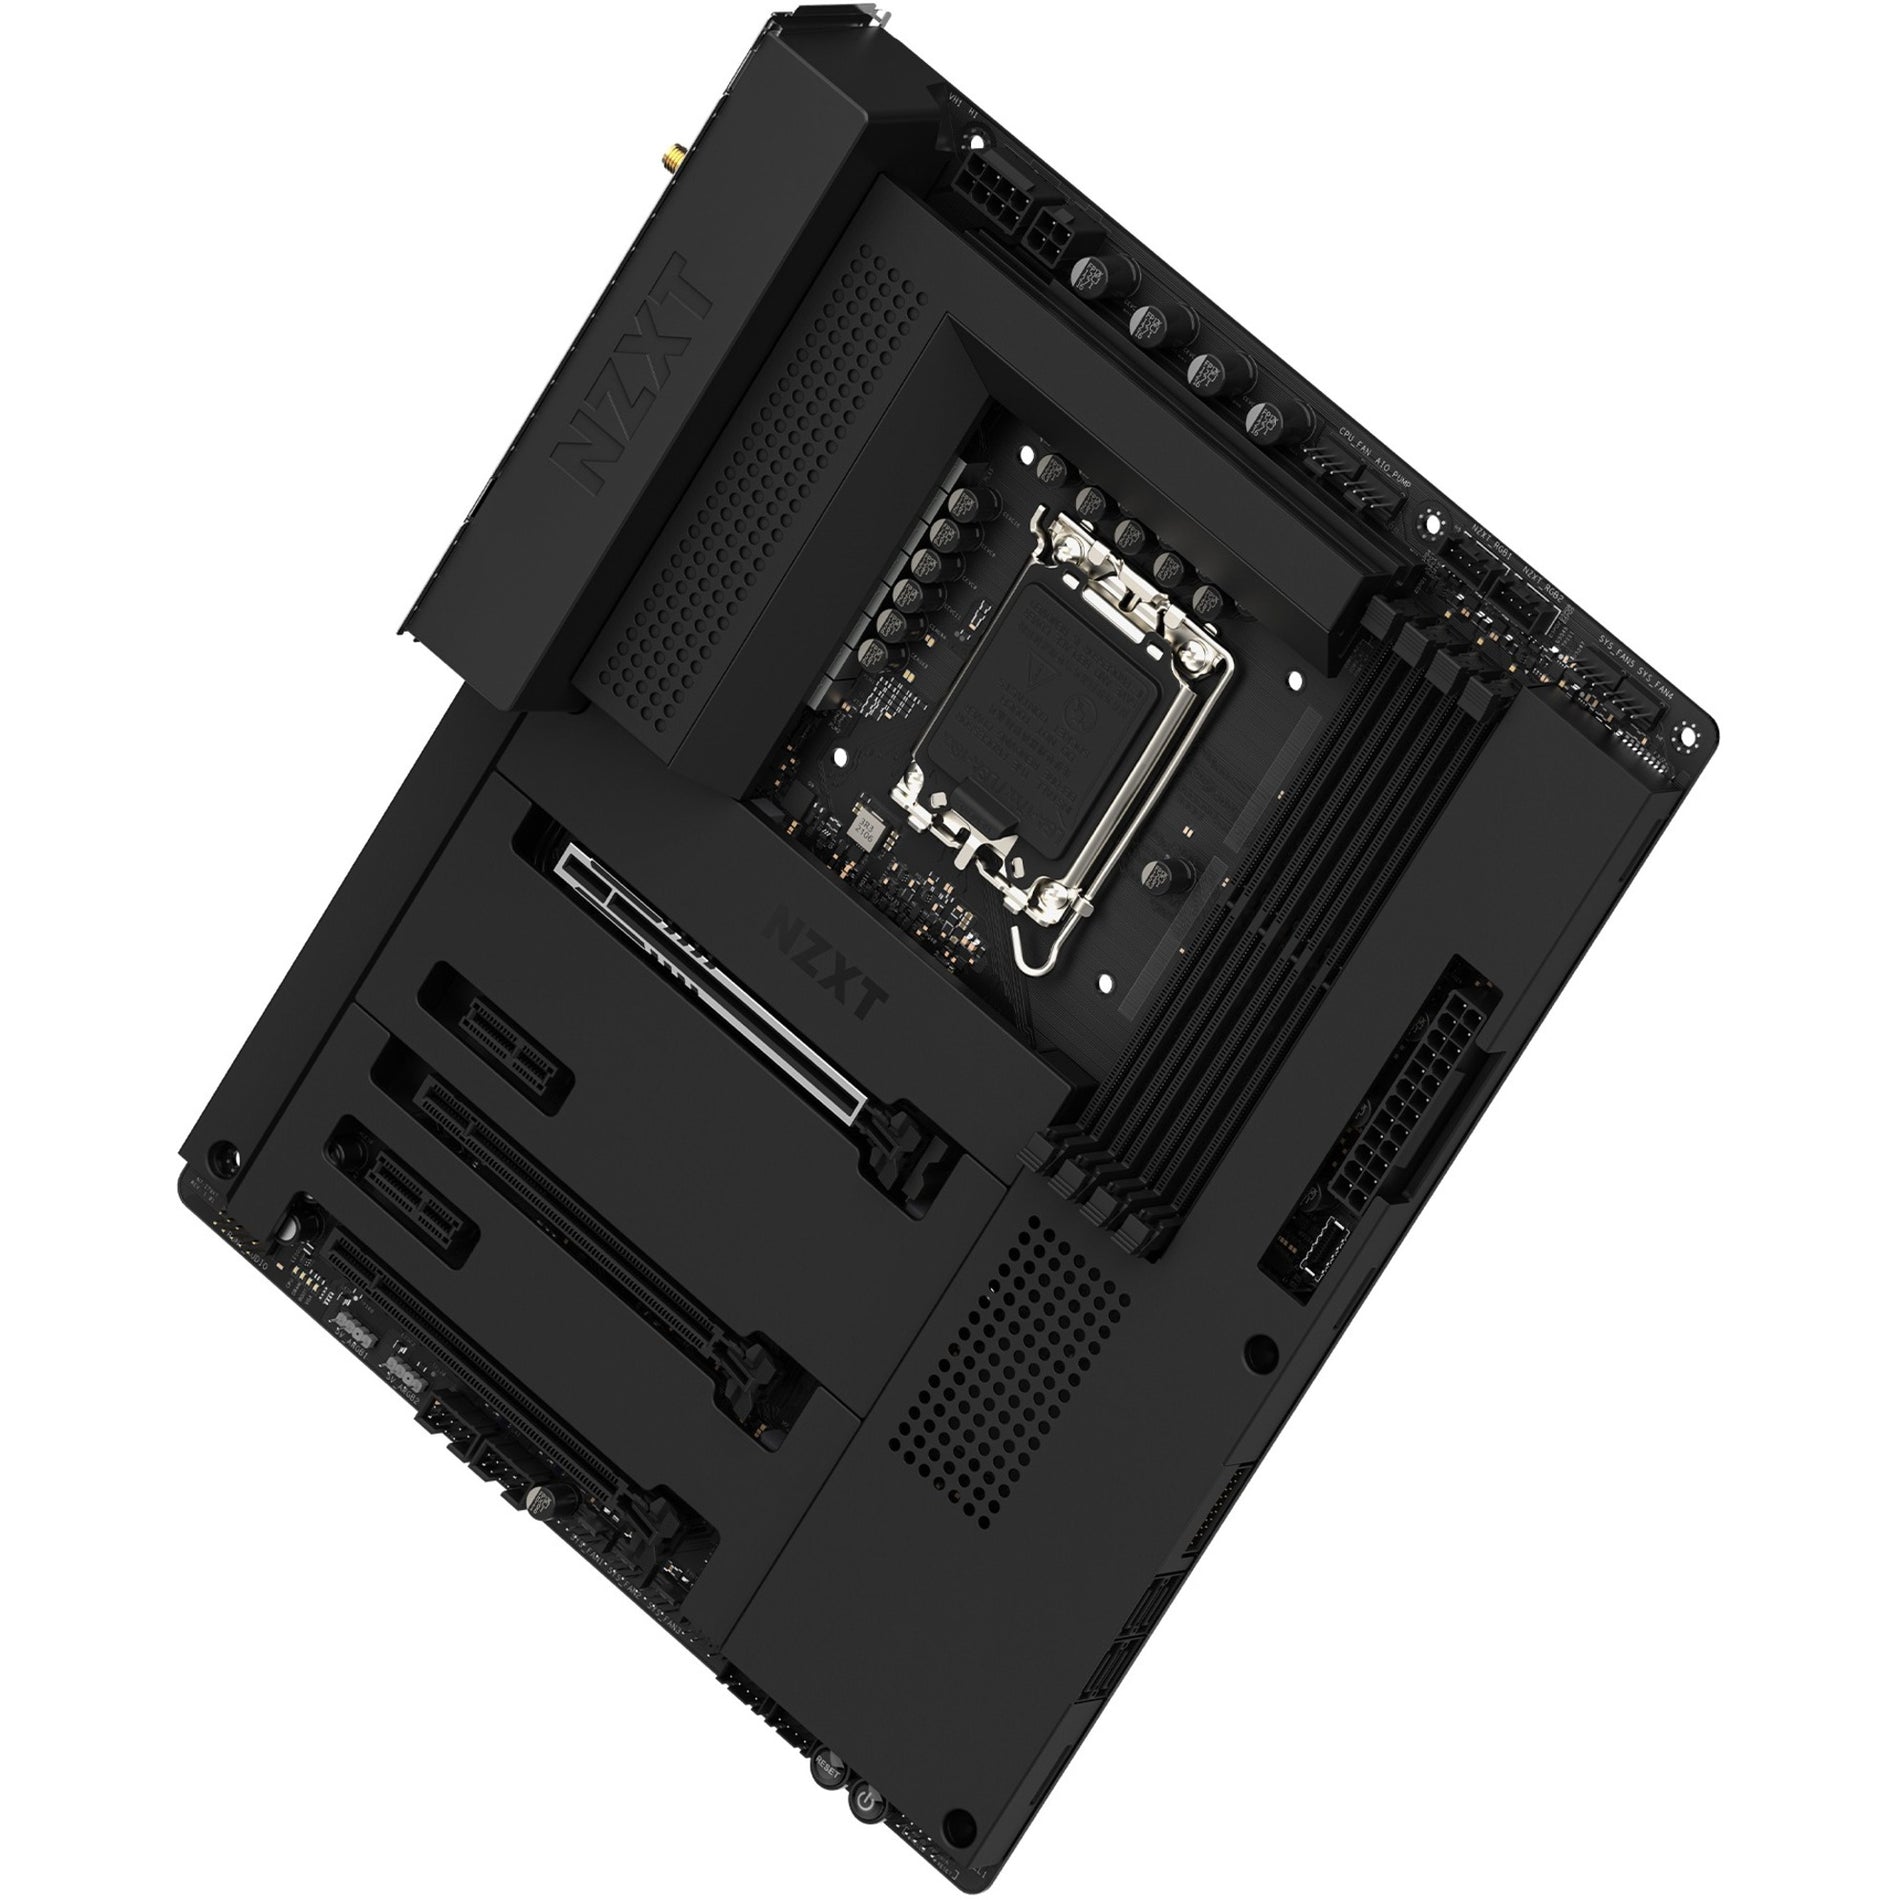 NZXT N7-Z79XT-B1 Desktop Motherboard, Intel Z790 Chipset with Wi-Fi and Black Cover